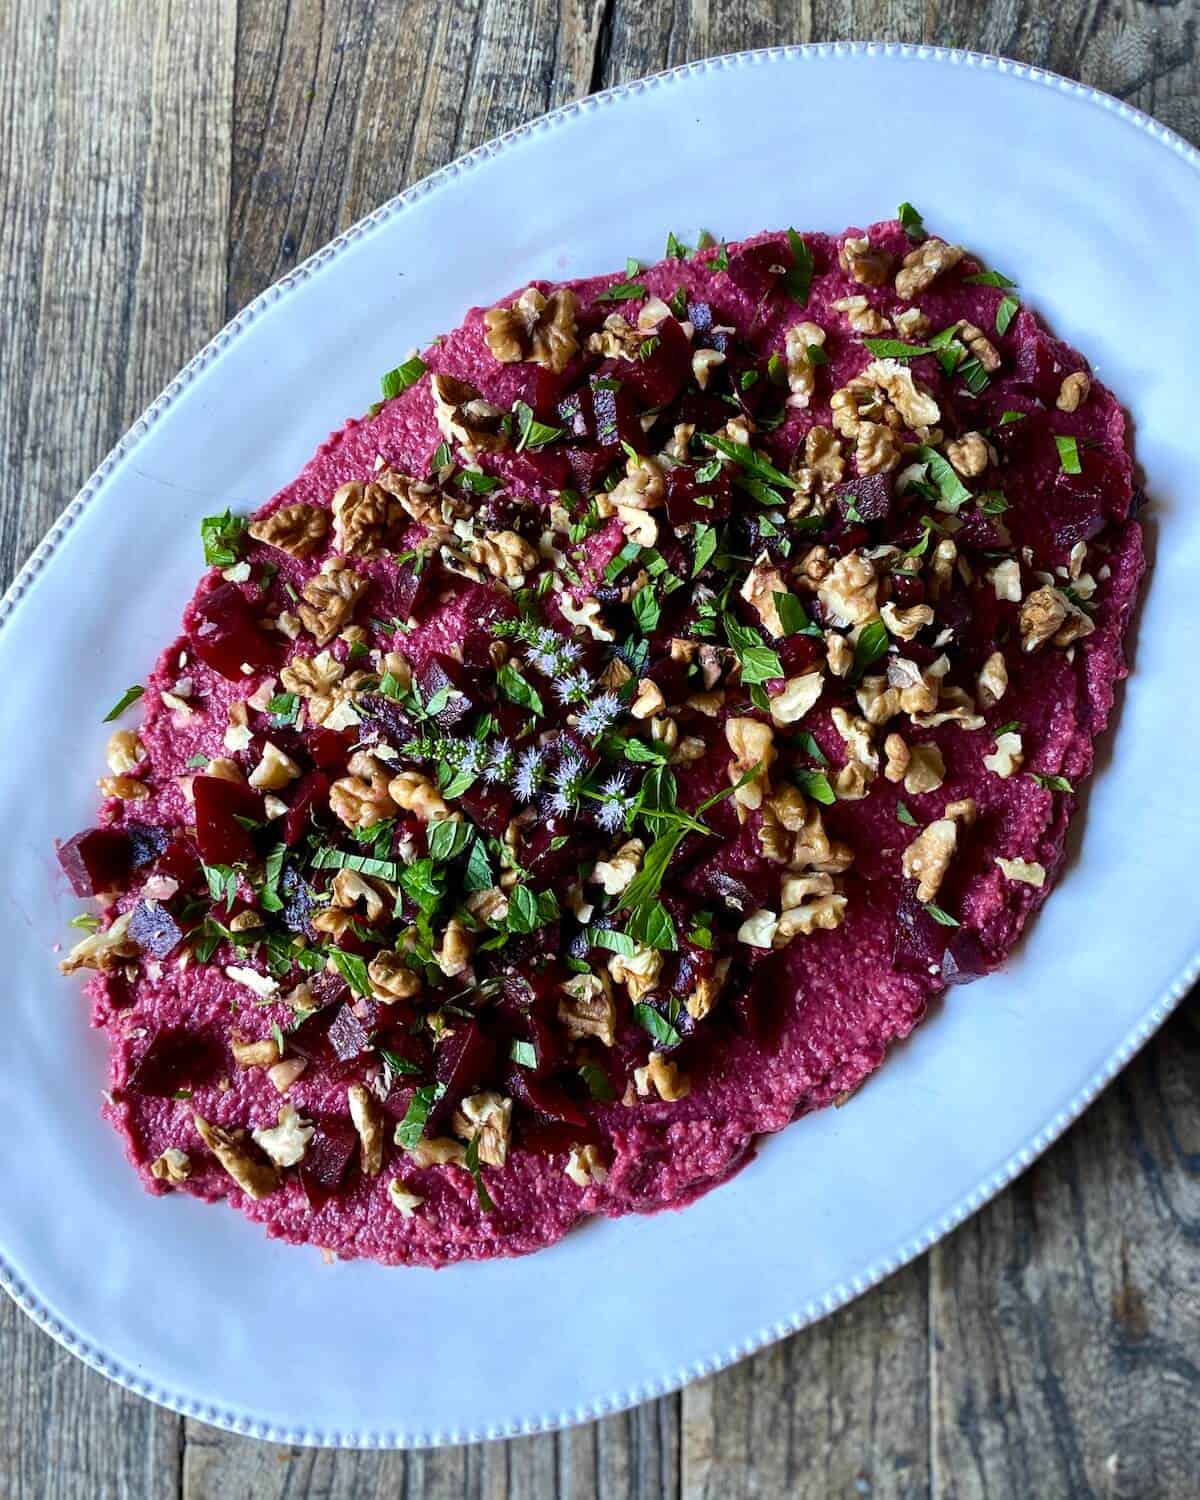 Beetroot hummus on an oval serving platter topped with chopped walnuts and fresh mint.